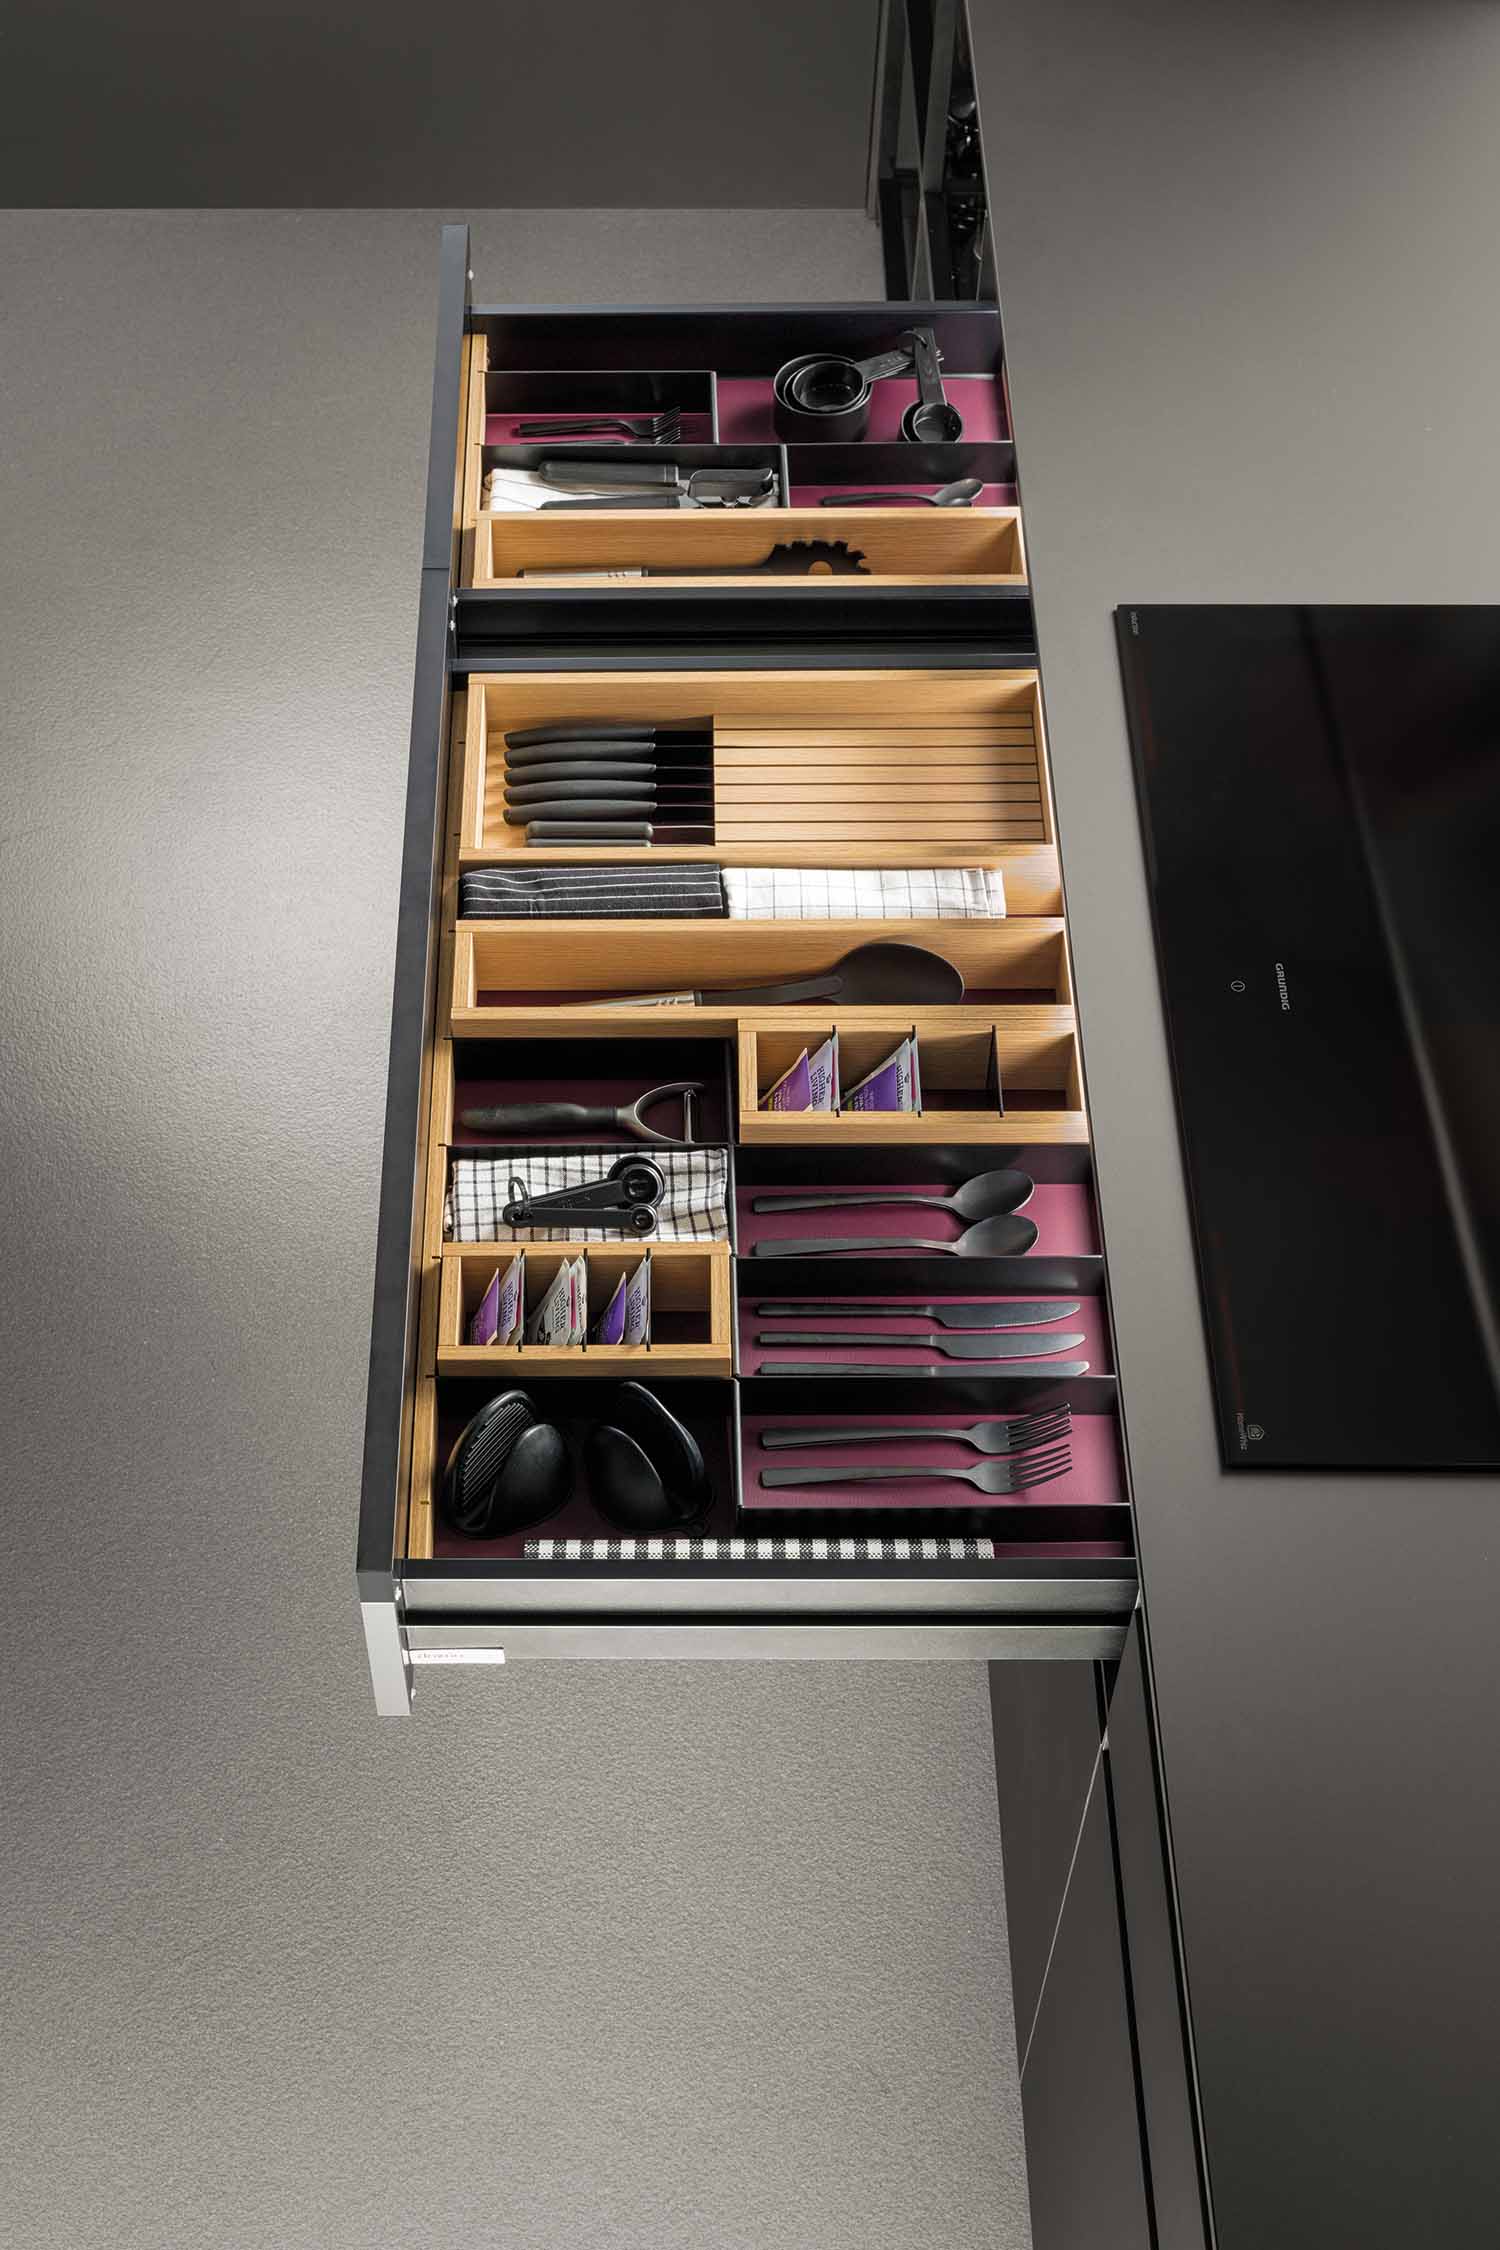 MDF oak drawer organisers for kitchen drawers